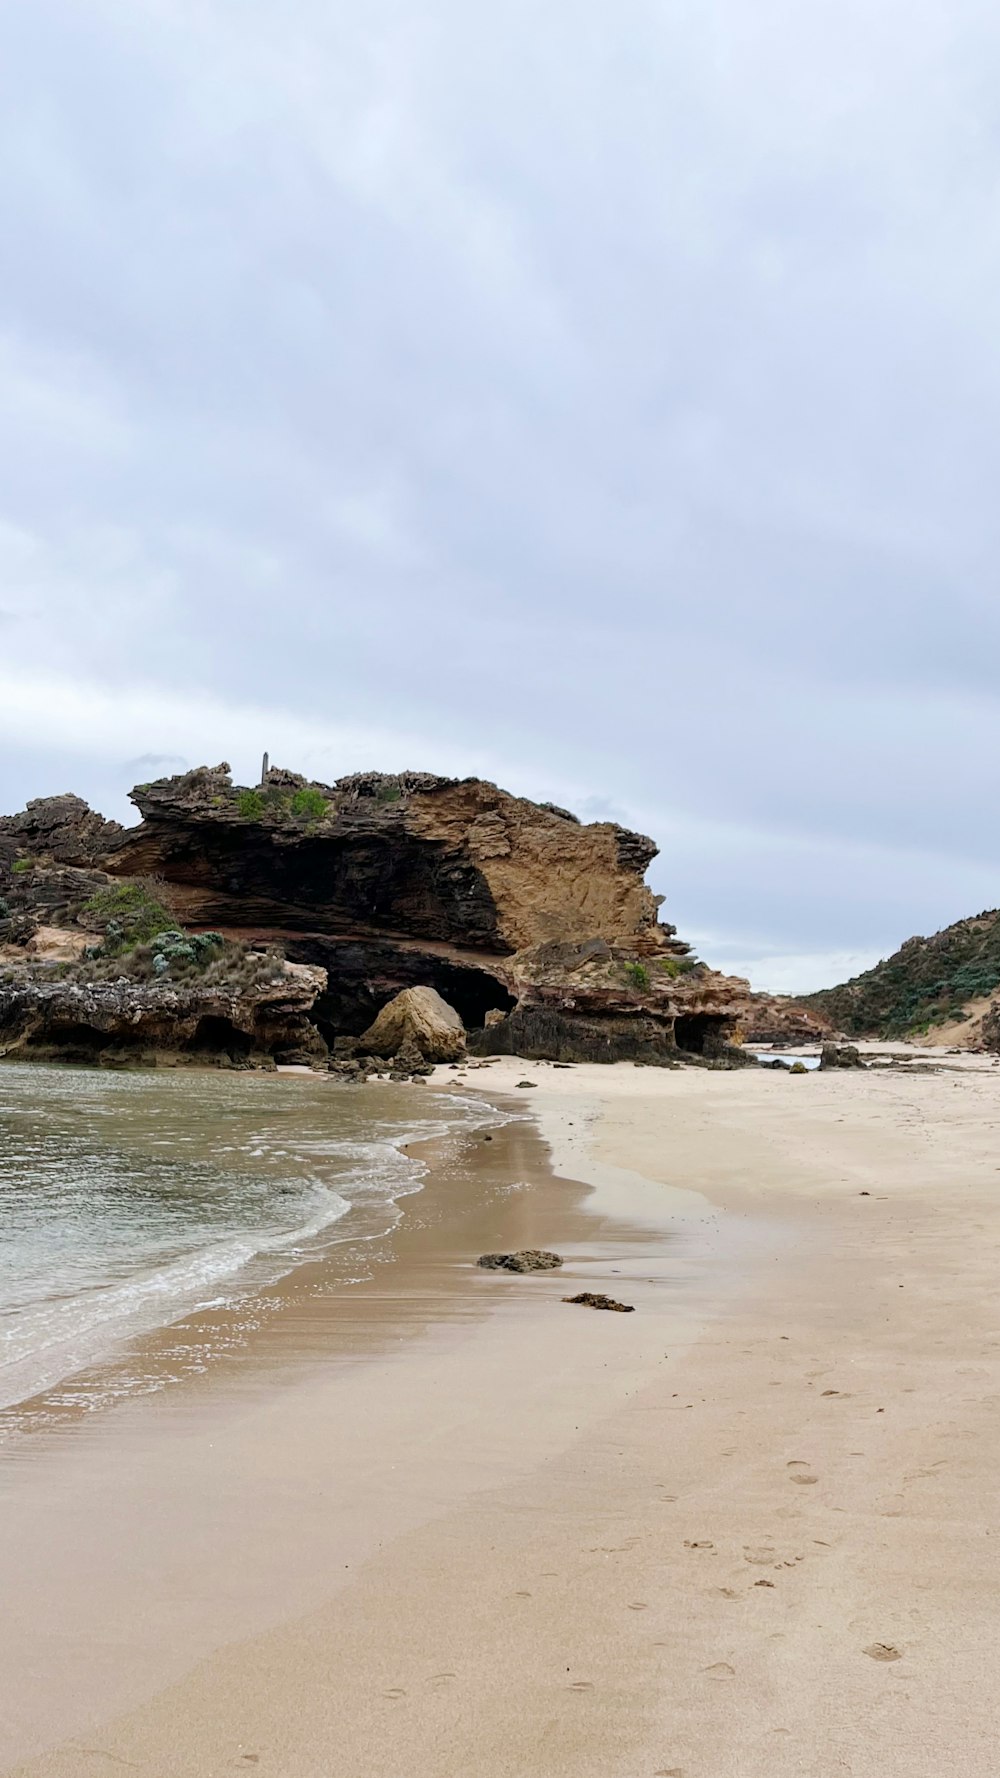 a sandy beach with a rock formation in the background